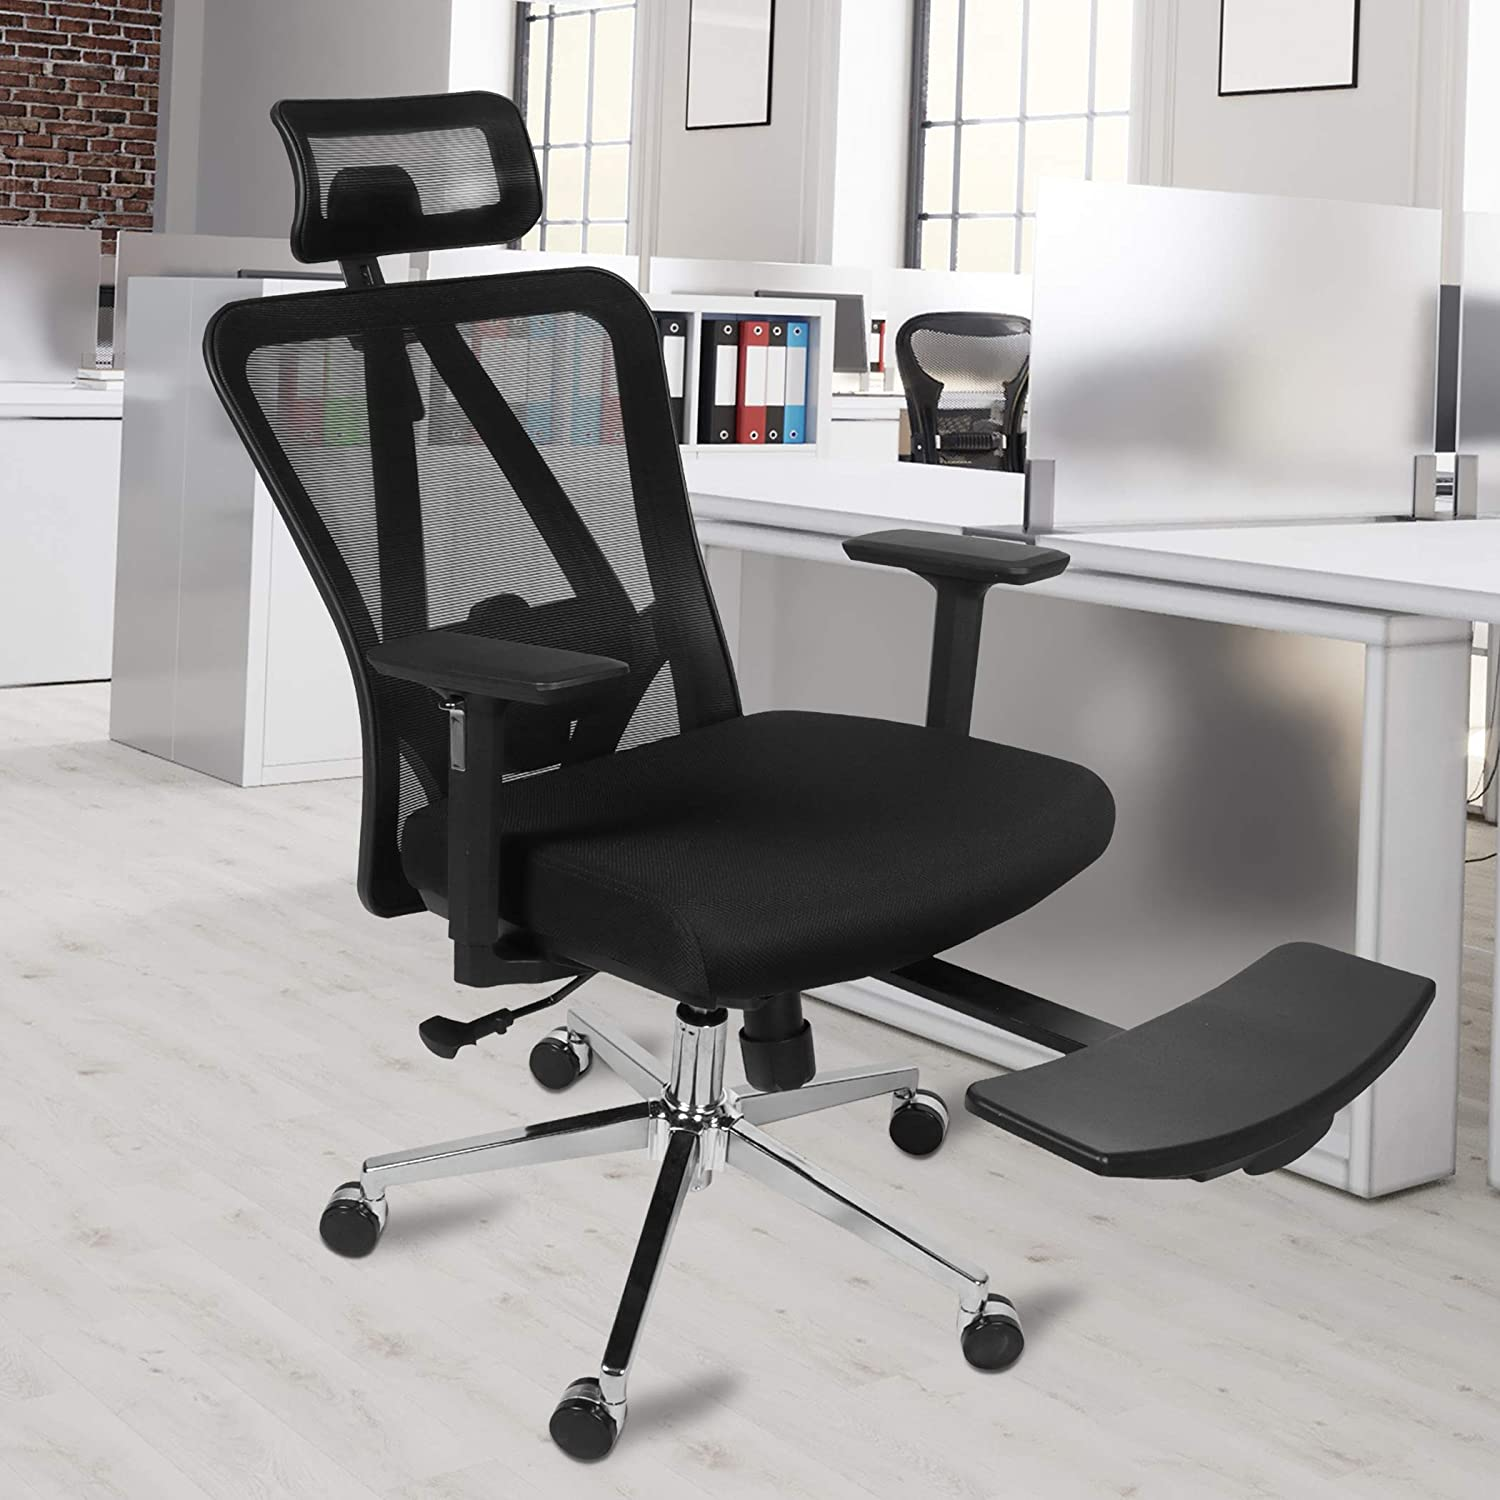 features of ergonomic chair